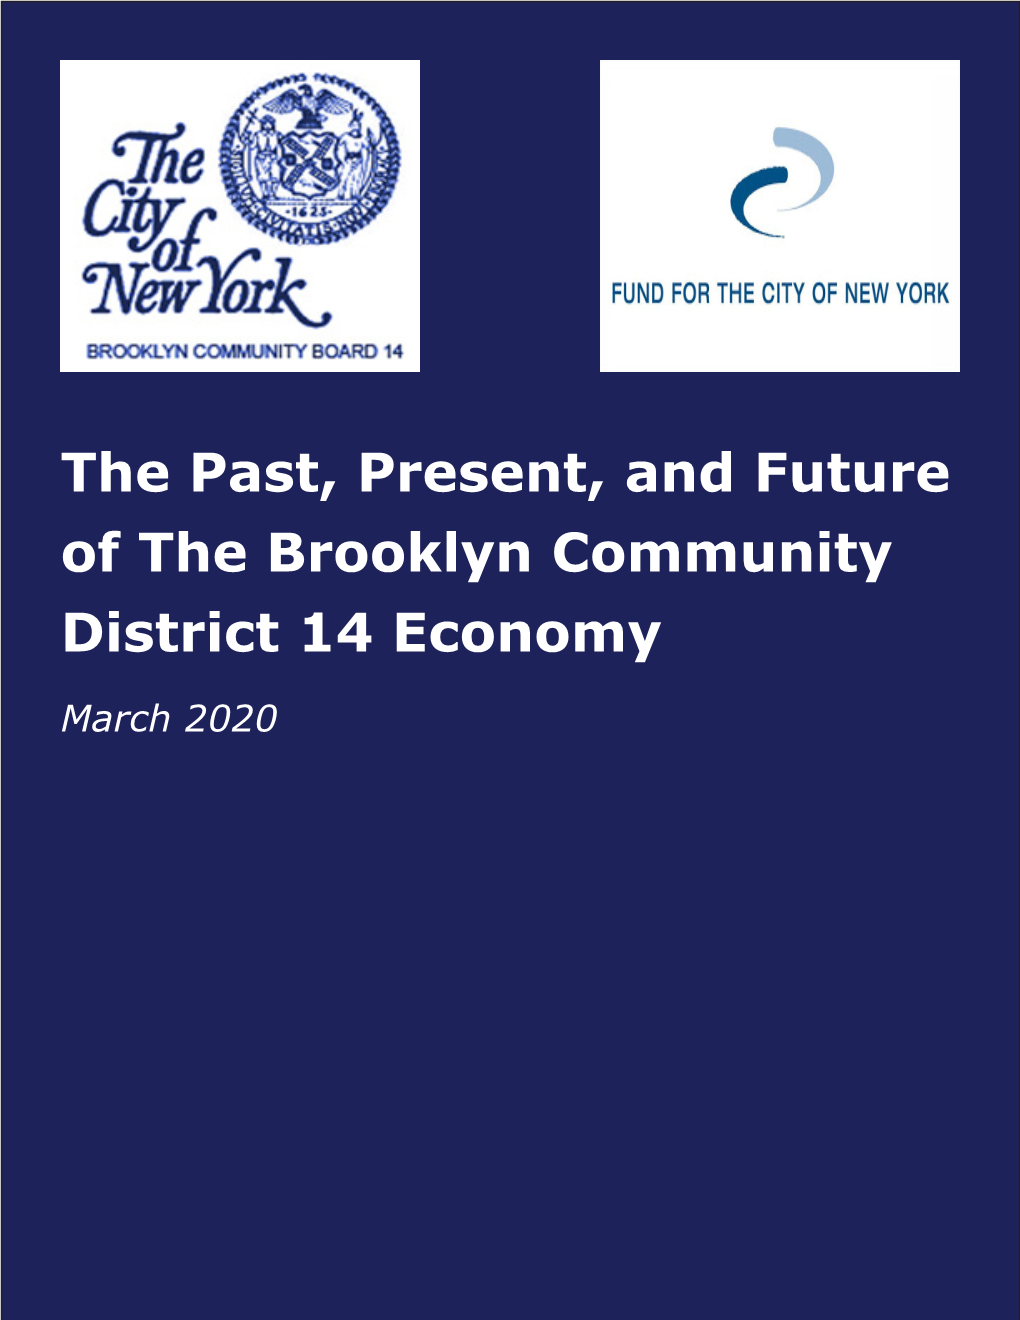 The Past, Present, and Future of the Brooklyn Community District 14 Economy